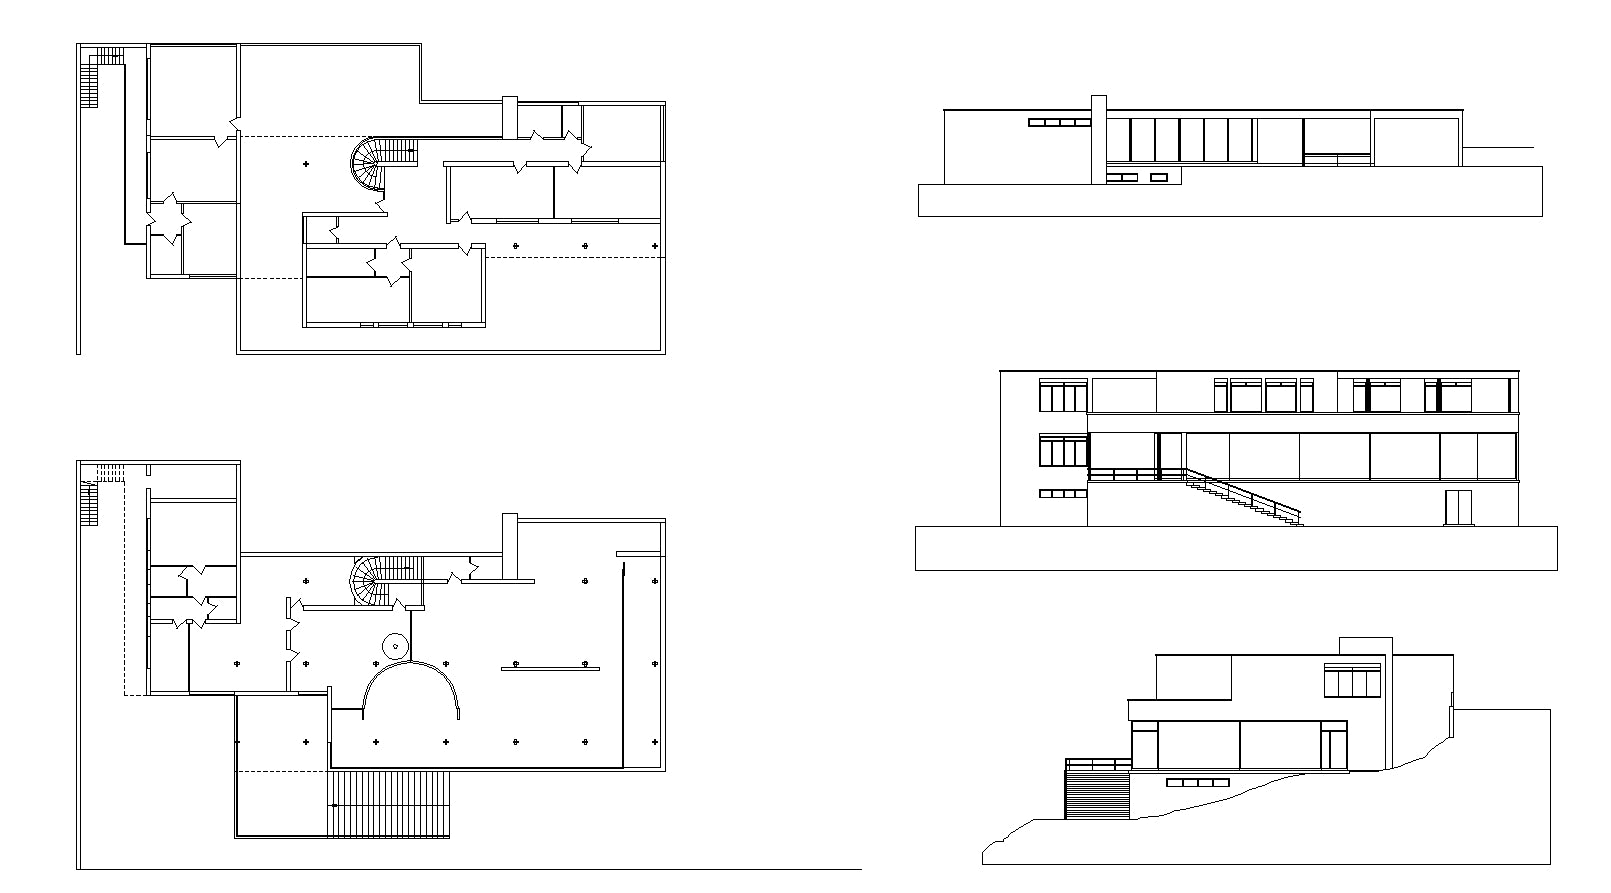 【Famous Architecture Project】Tugendhat Villa-Ludwig Mies van der Rohe-CAD Drawings